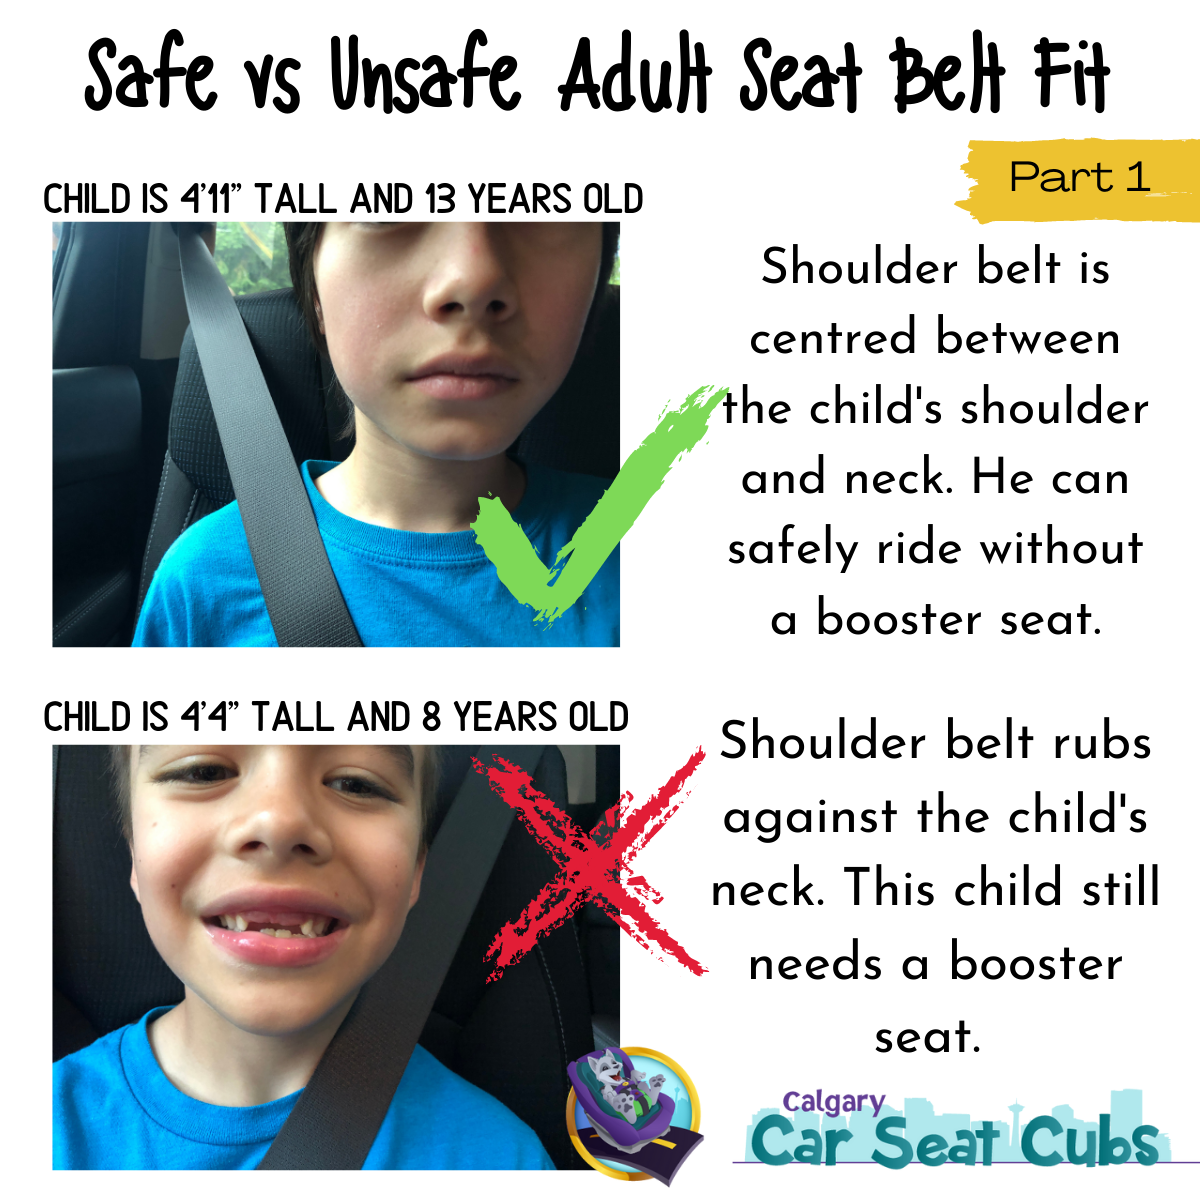 https://mamanloupsden.com/wp-content/uploads/2019/04/mamanloupsden.com-booster-seats-for-big-kids-helicopter-parenting-or-common-sense-hint-its-the-latter-1.png